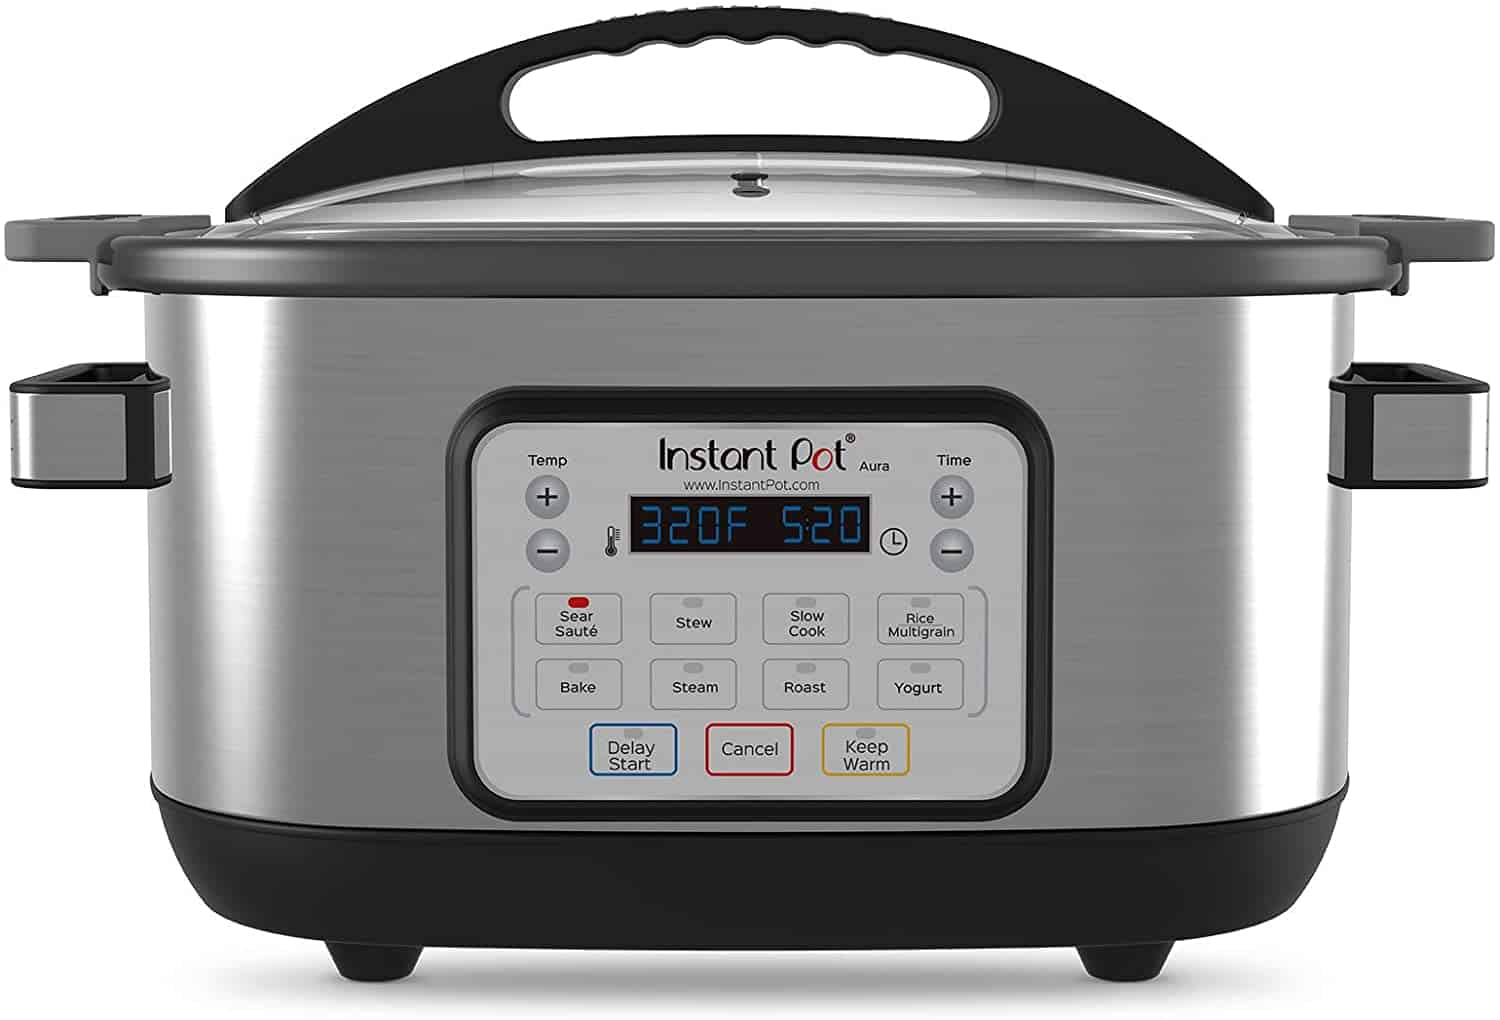 Instant Pot Aura 10-in-1 6-Quart Multicooker Slow Cooker – $59.99 Shipped